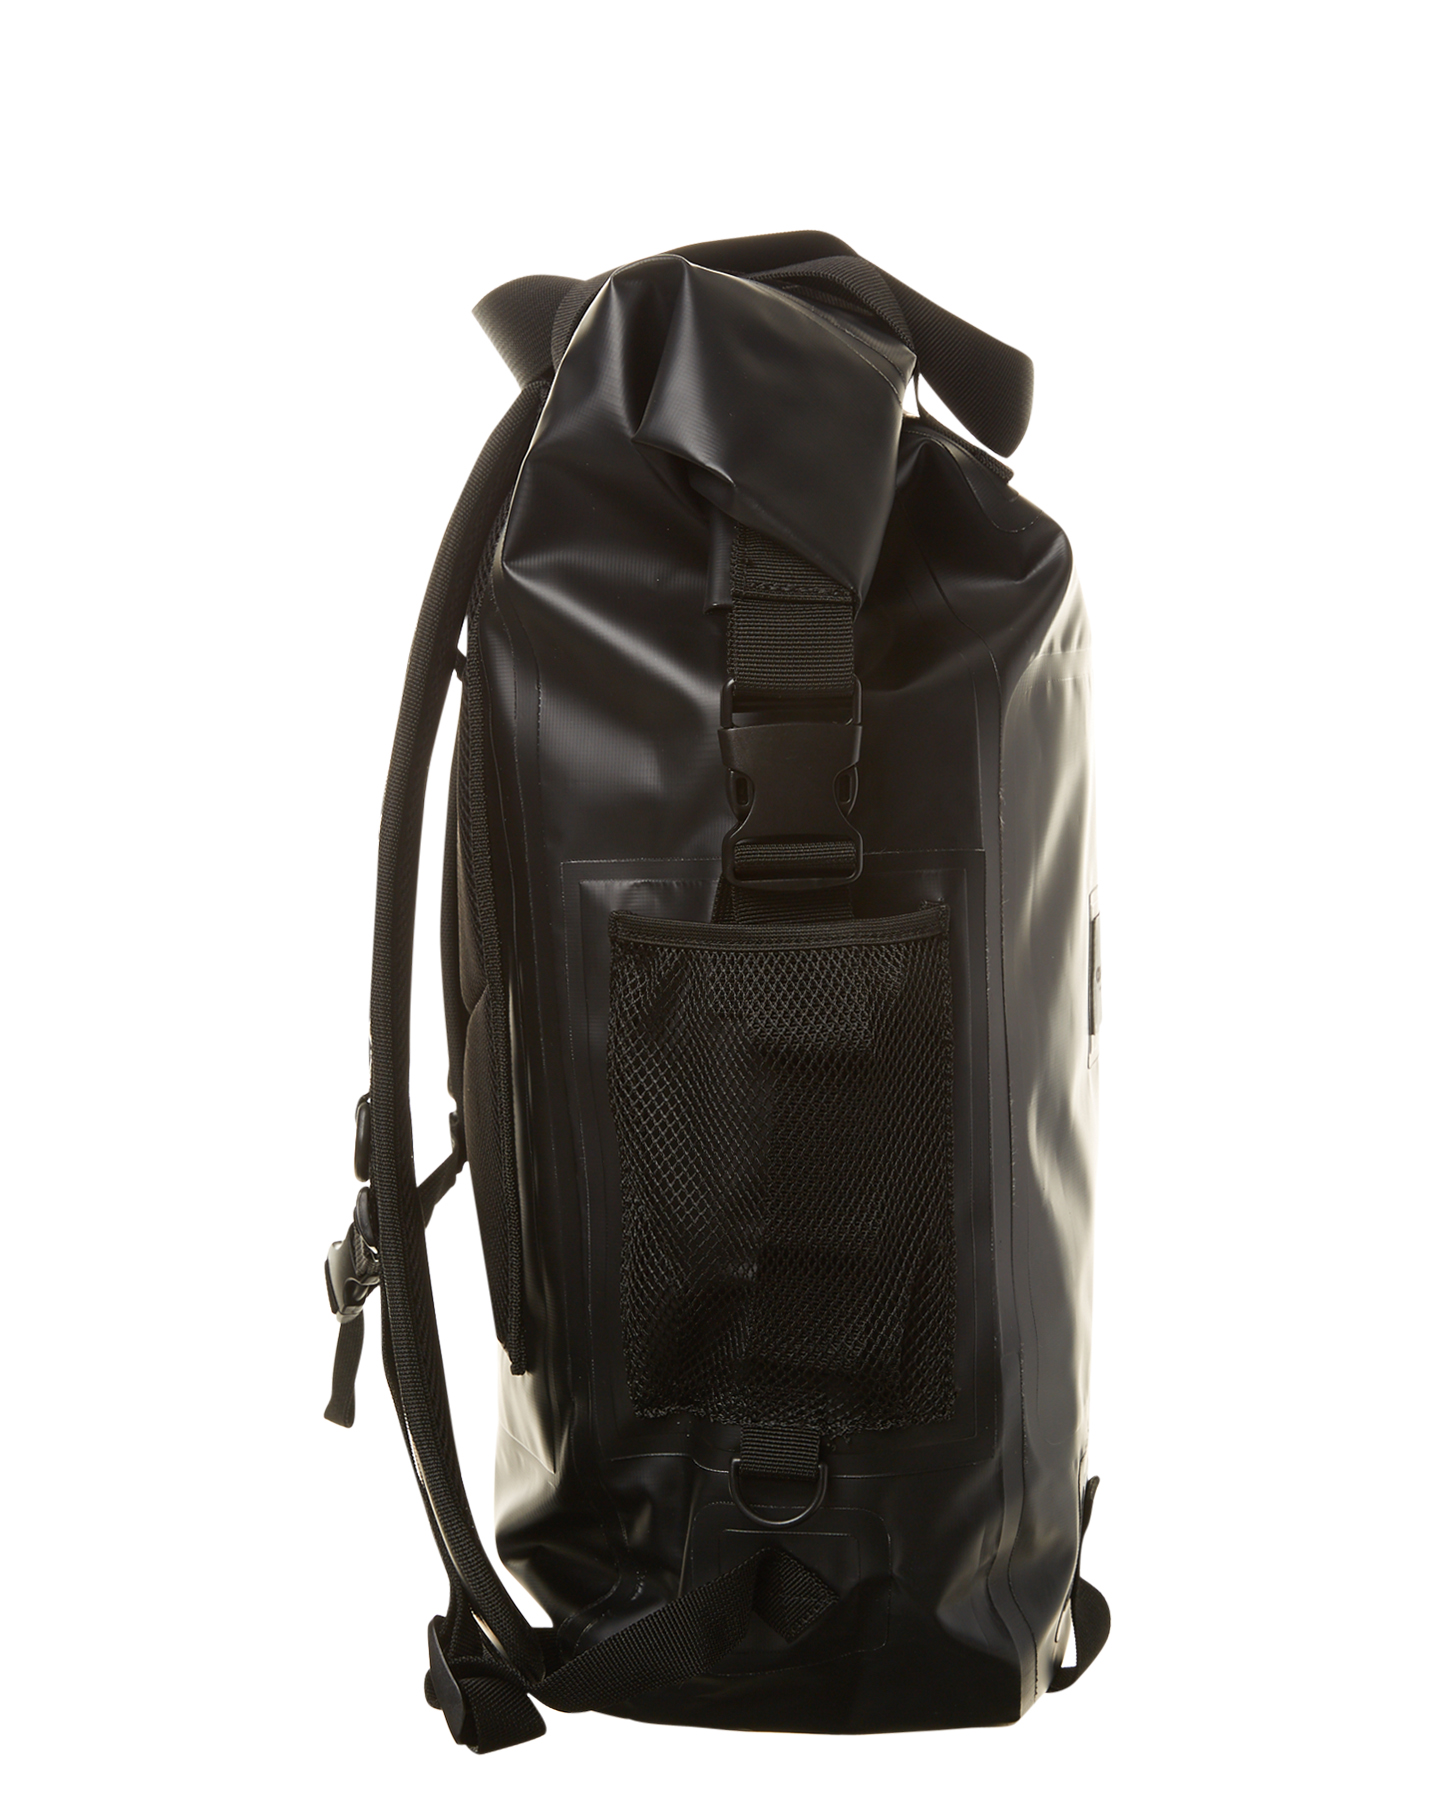 Ourcaste Jacque Waterproof Backpack - Black | SurfStitch